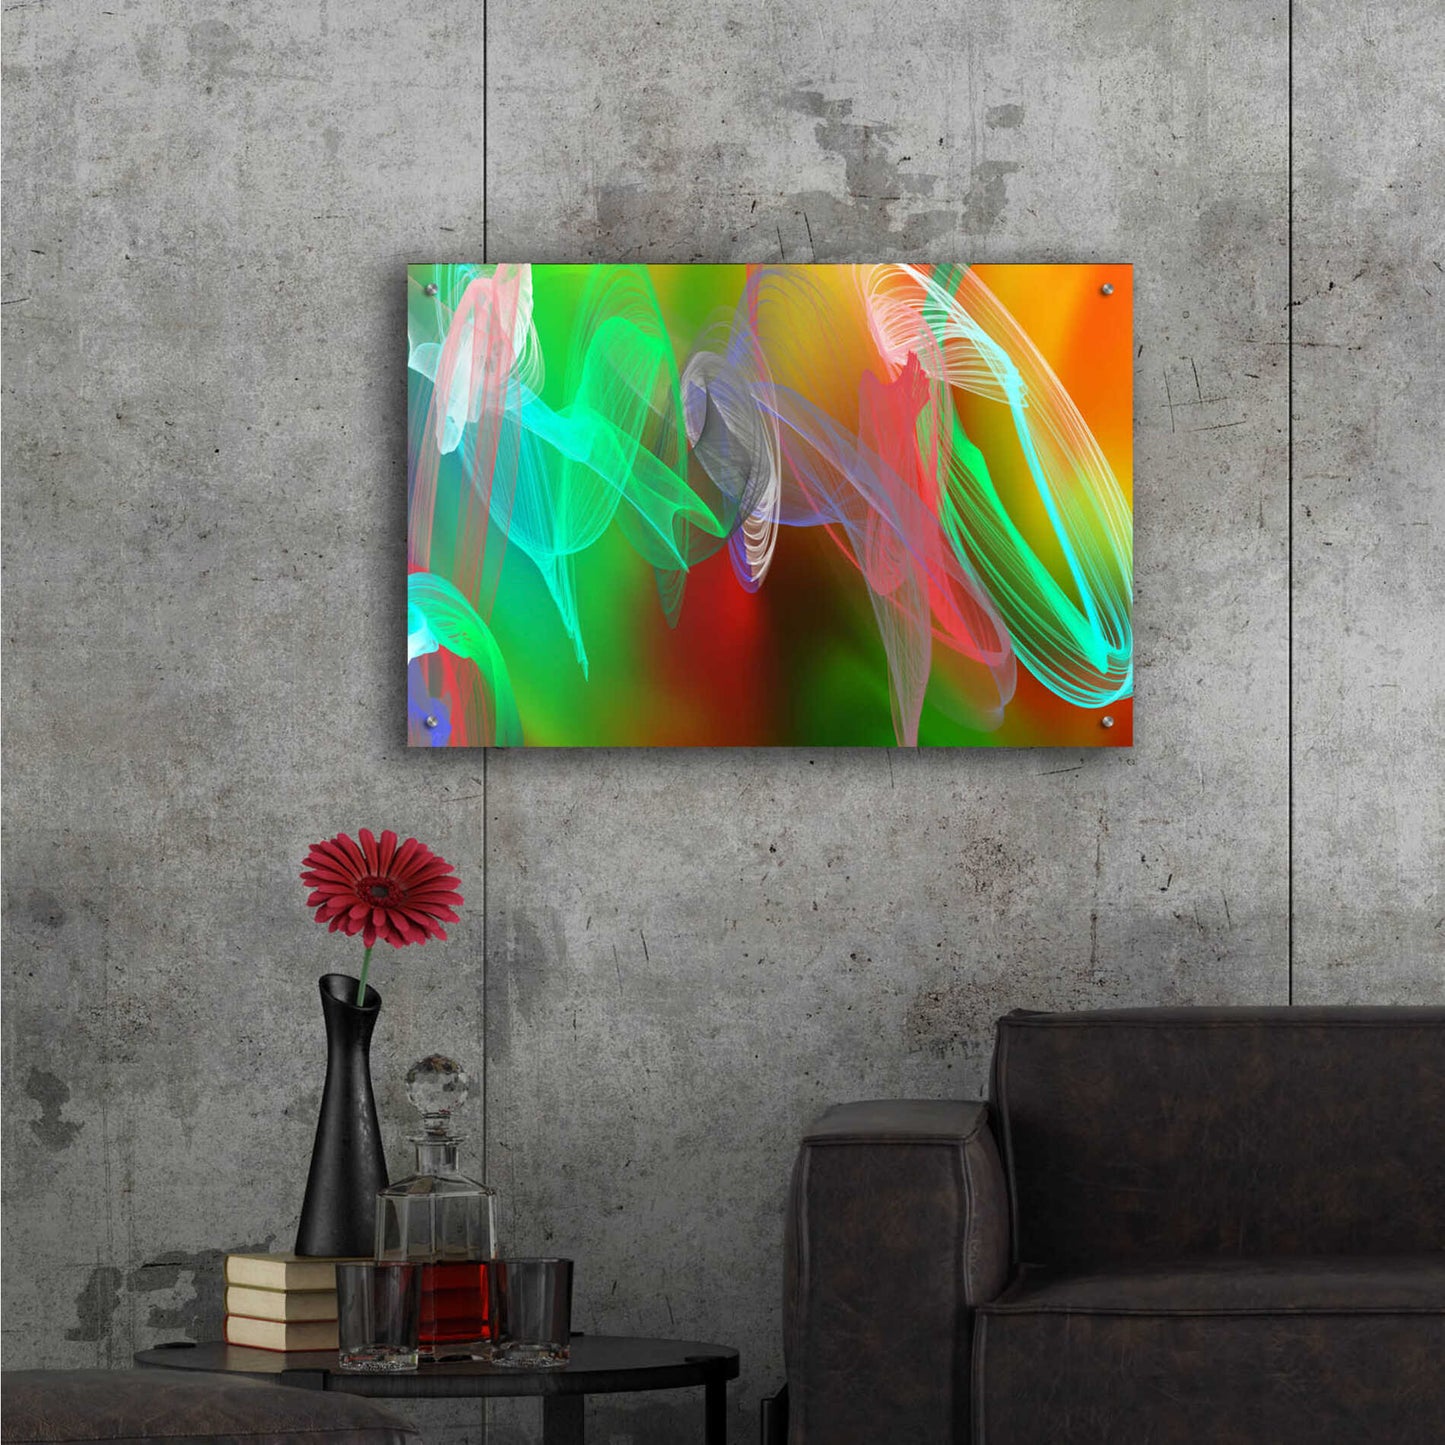 Epic Art 'Inverted Color In The Lines 7' by Irena Orlov Acrylic Glass Wall Art,36x24